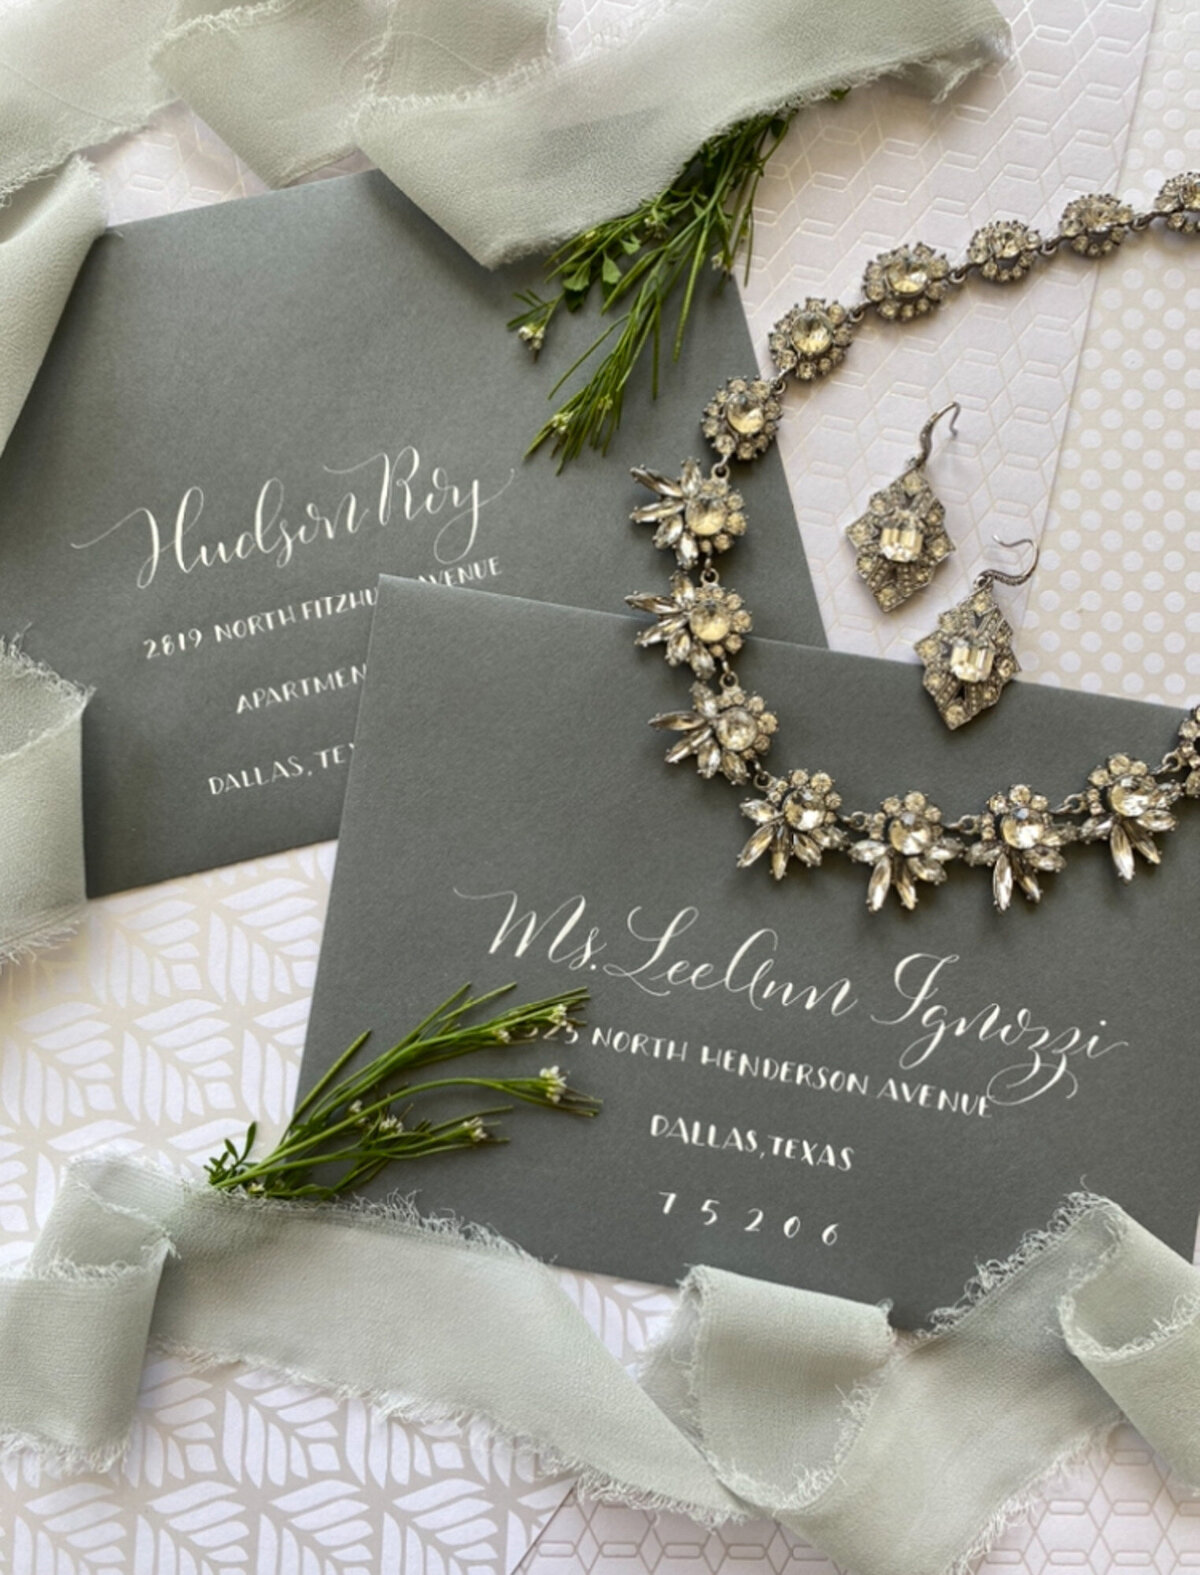 Modern envelope with calligraphy by Scribble Savvy with jewelry details